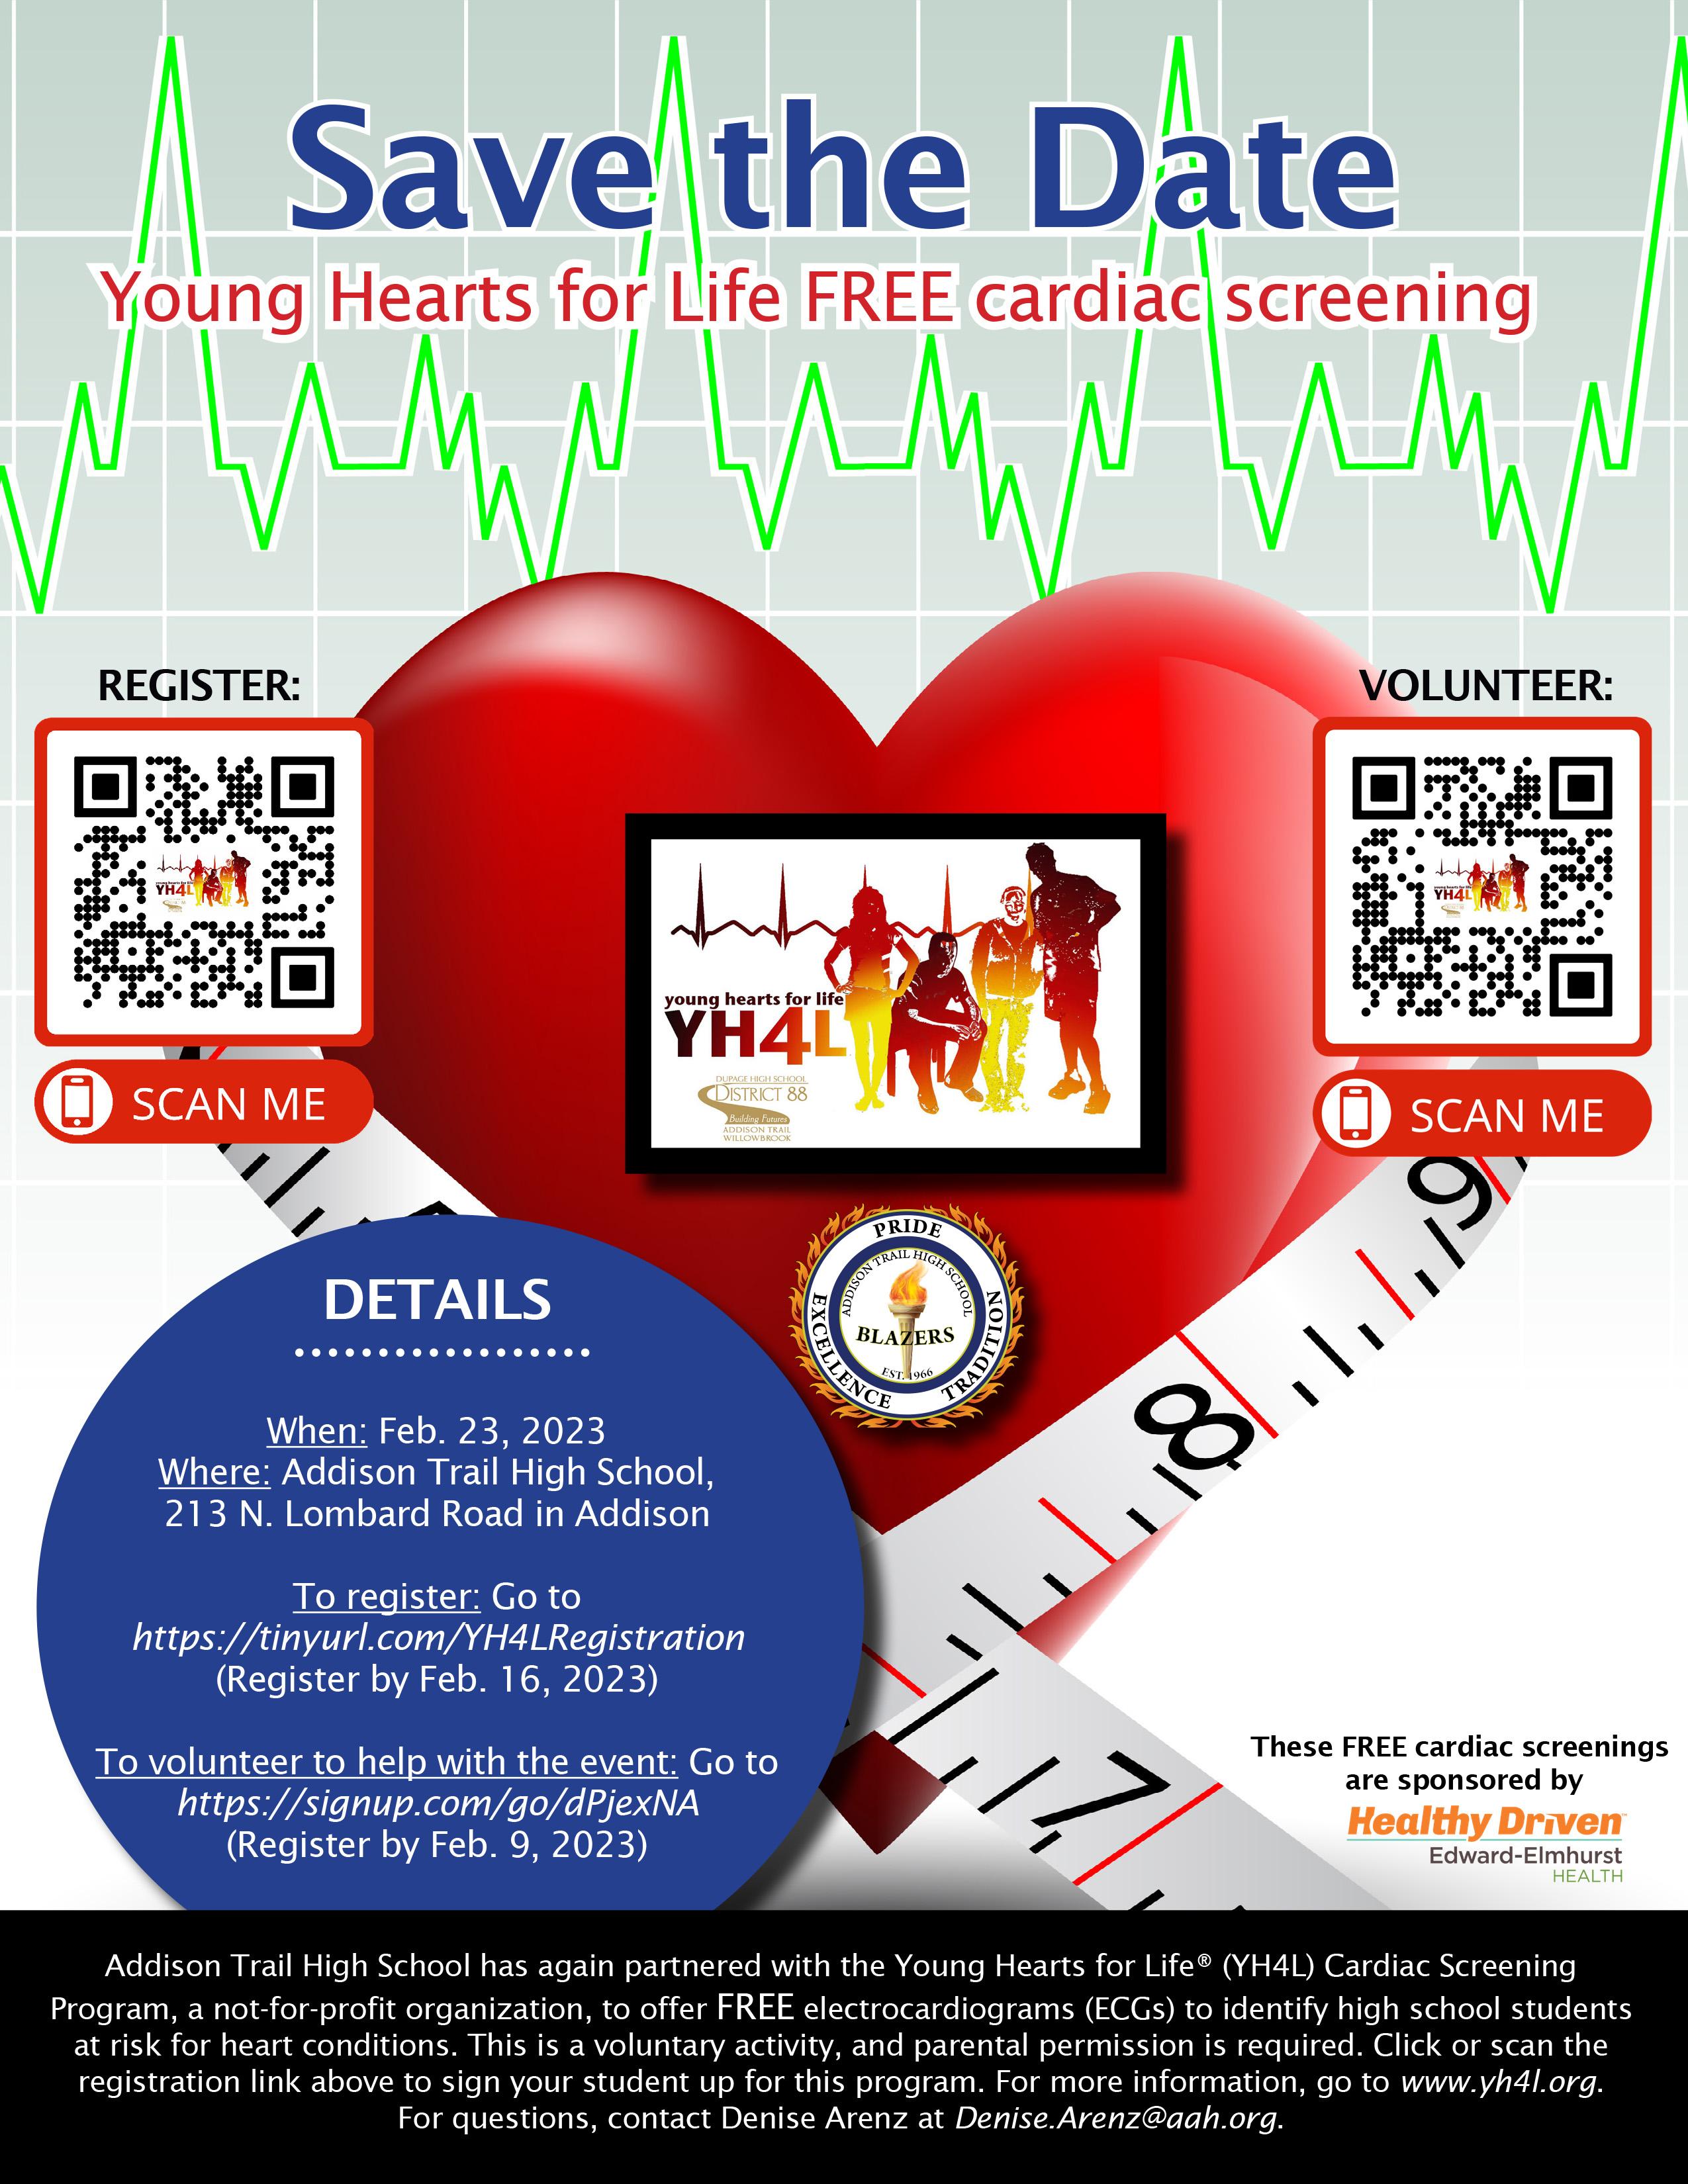 Addison Trail to partner with Young Hearts for Life to provide free cardiac screenings for students